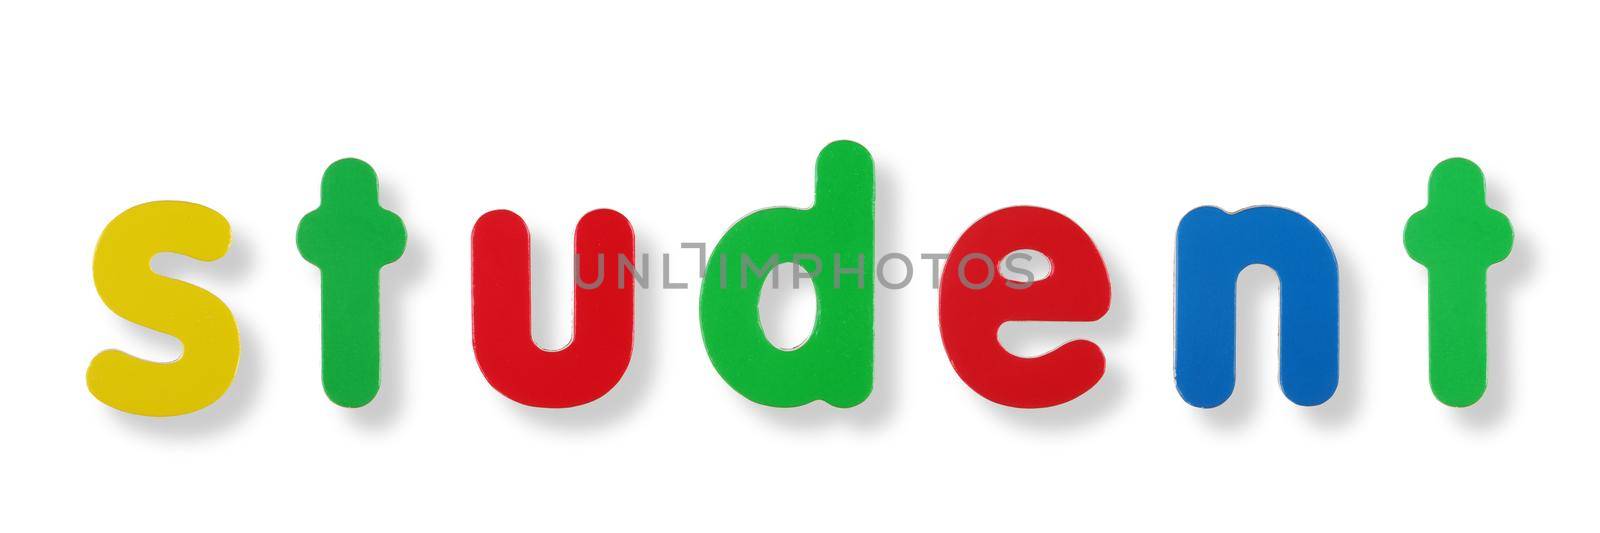 Student coloured magnetic letters on white with clipping path to remove shadow